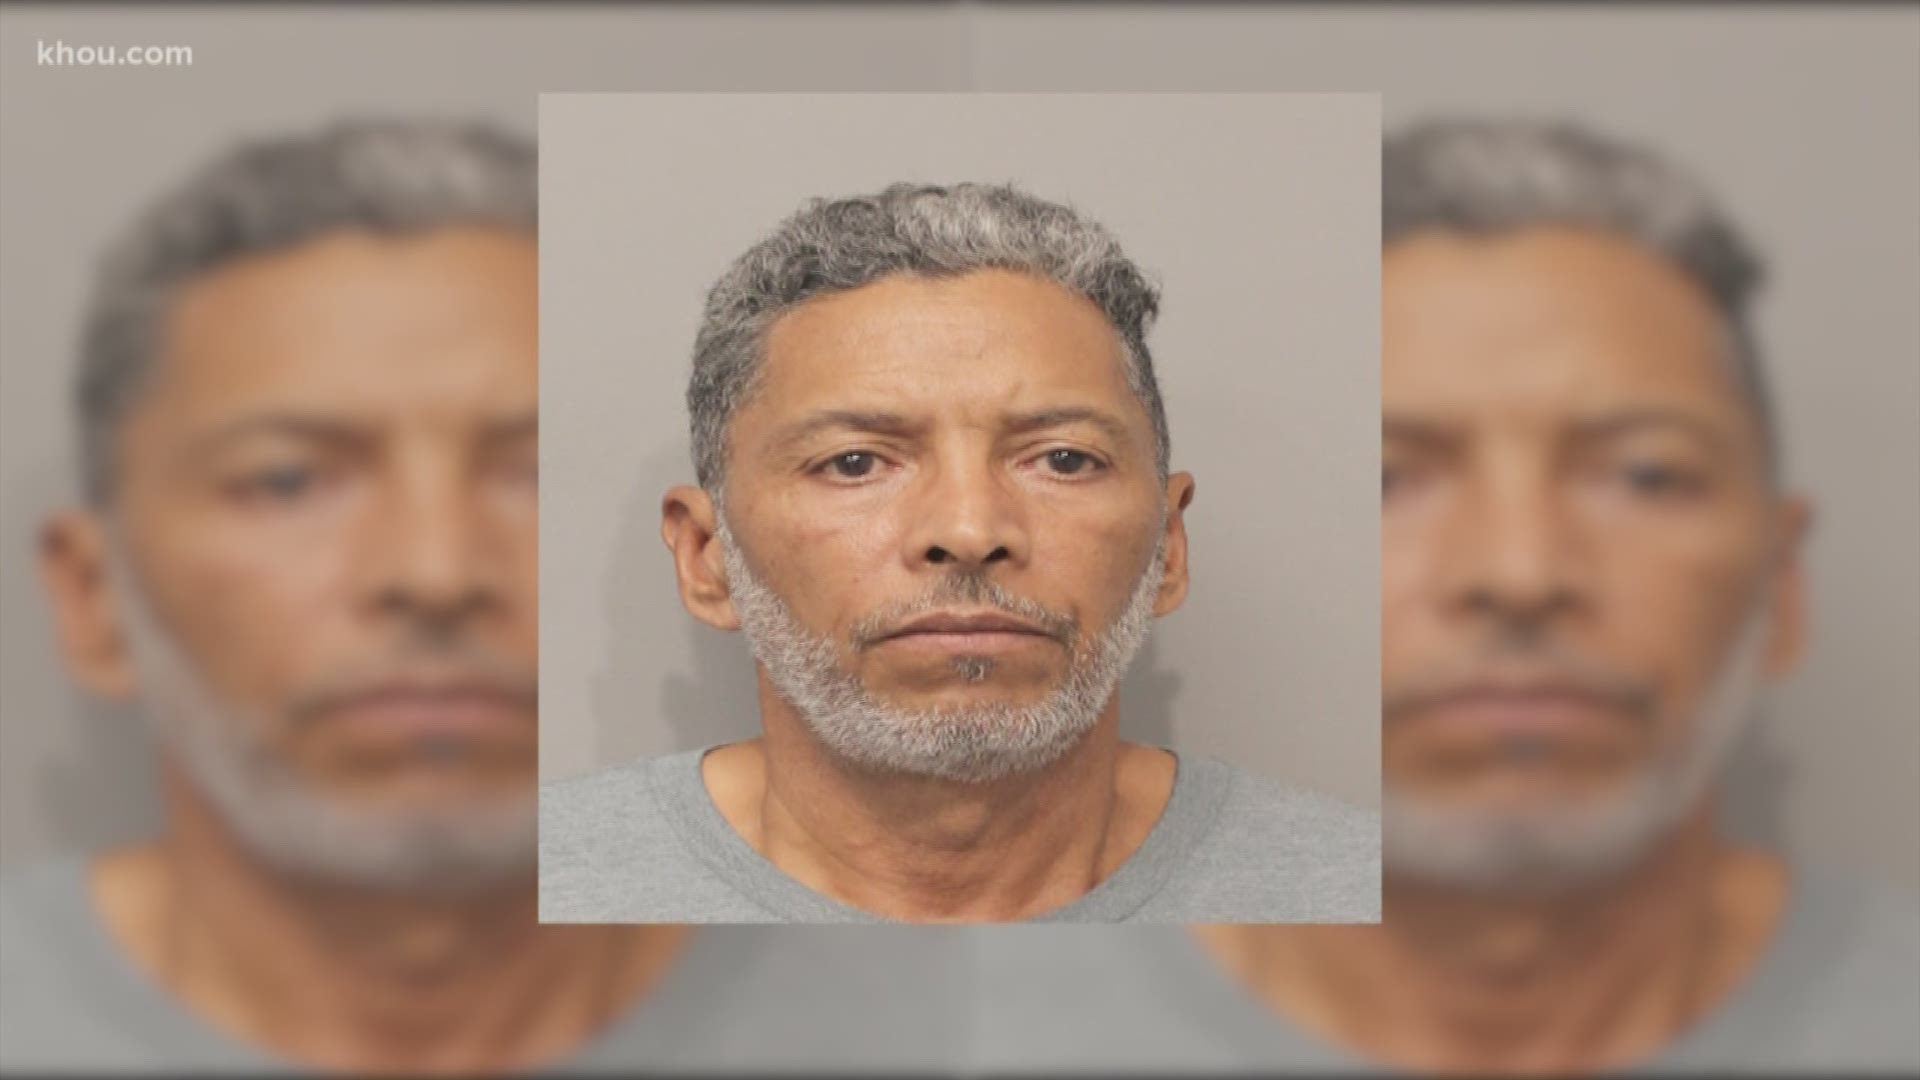 A Houston-area pastor has been charged with sexually abusing a 13-year-old girl.